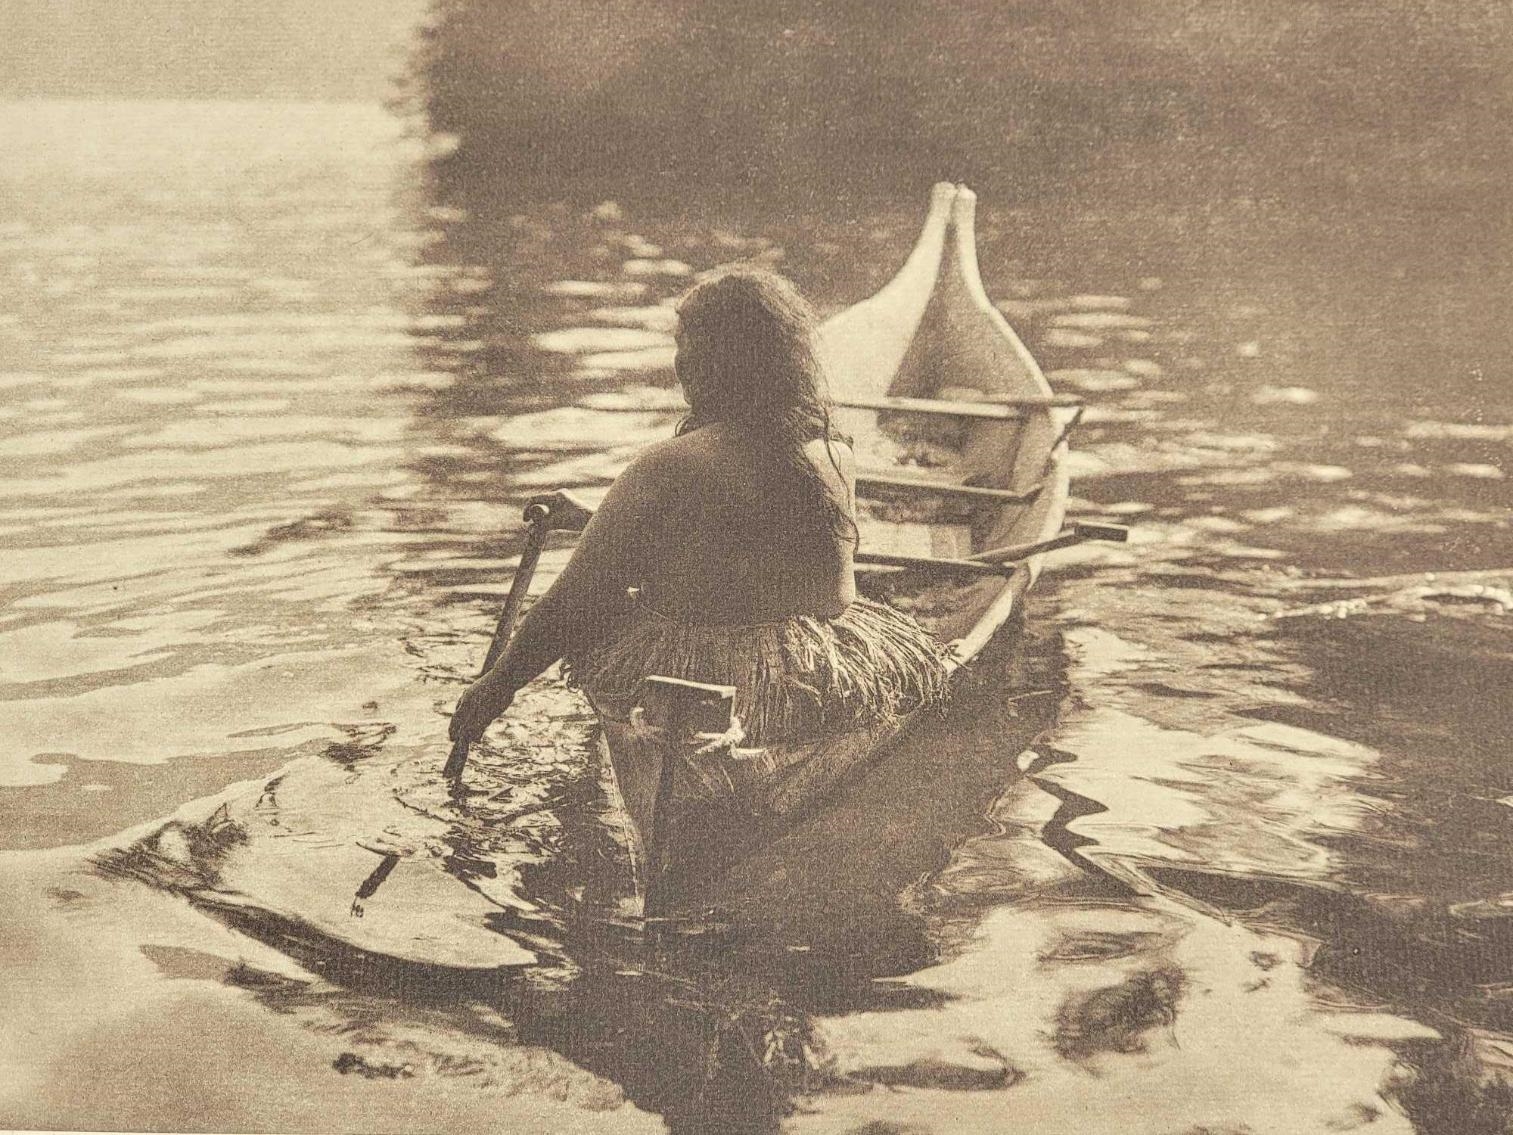 Into the Shadow - Clayoquot by Edward S. Curtis, Originally photographed c.1915